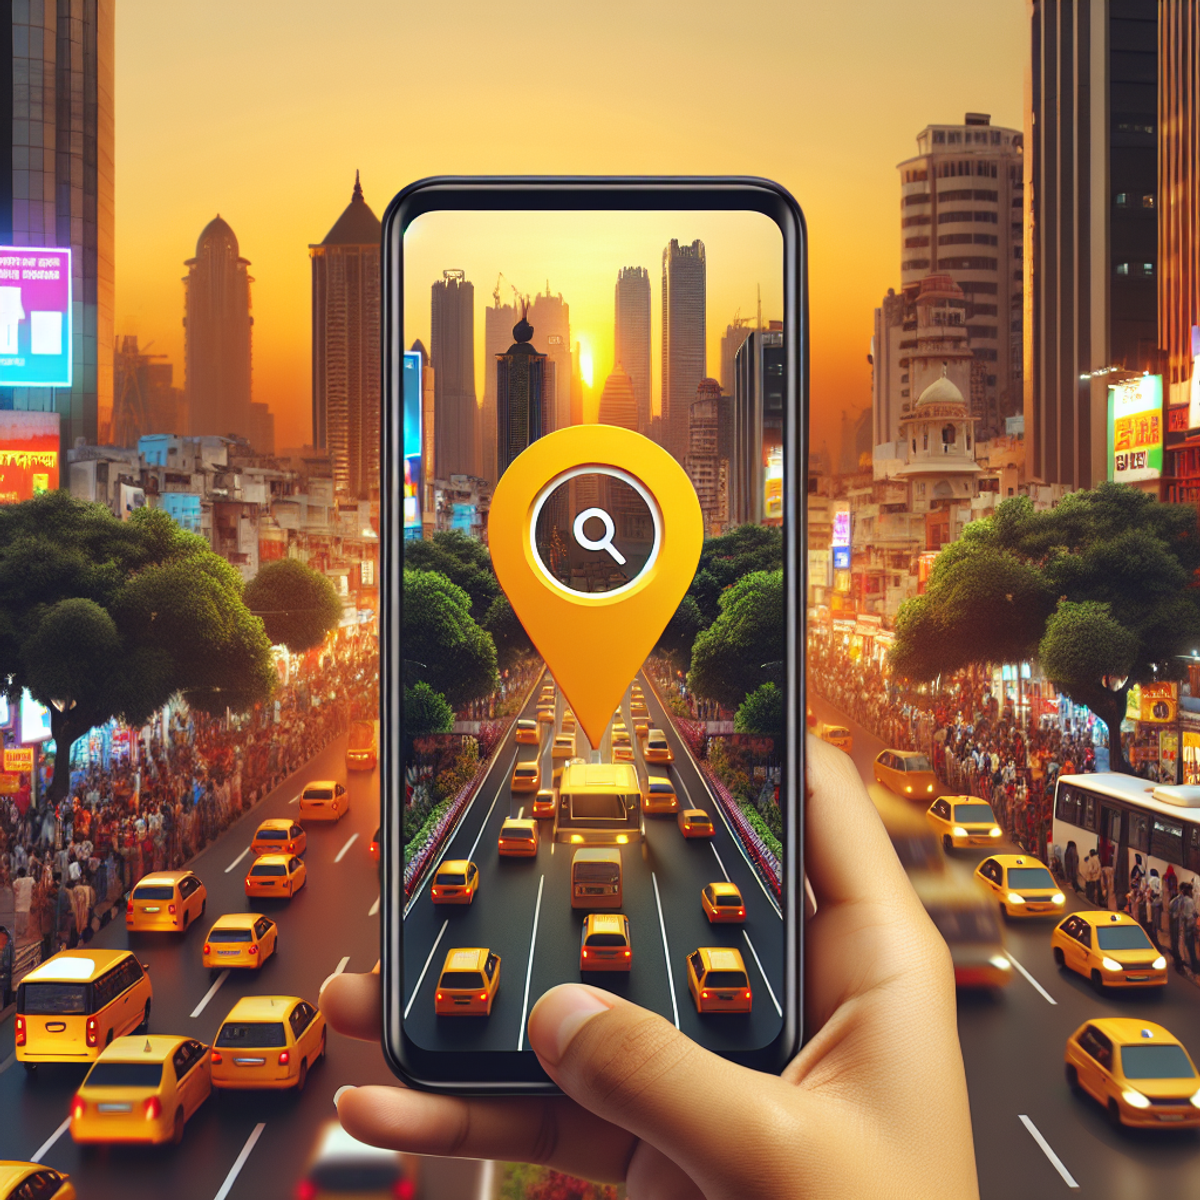 A modern smartphone displaying a yellow circular icon, symbolizing a local search service app, on the screen with a vibrant, bustling cityscape in the background.